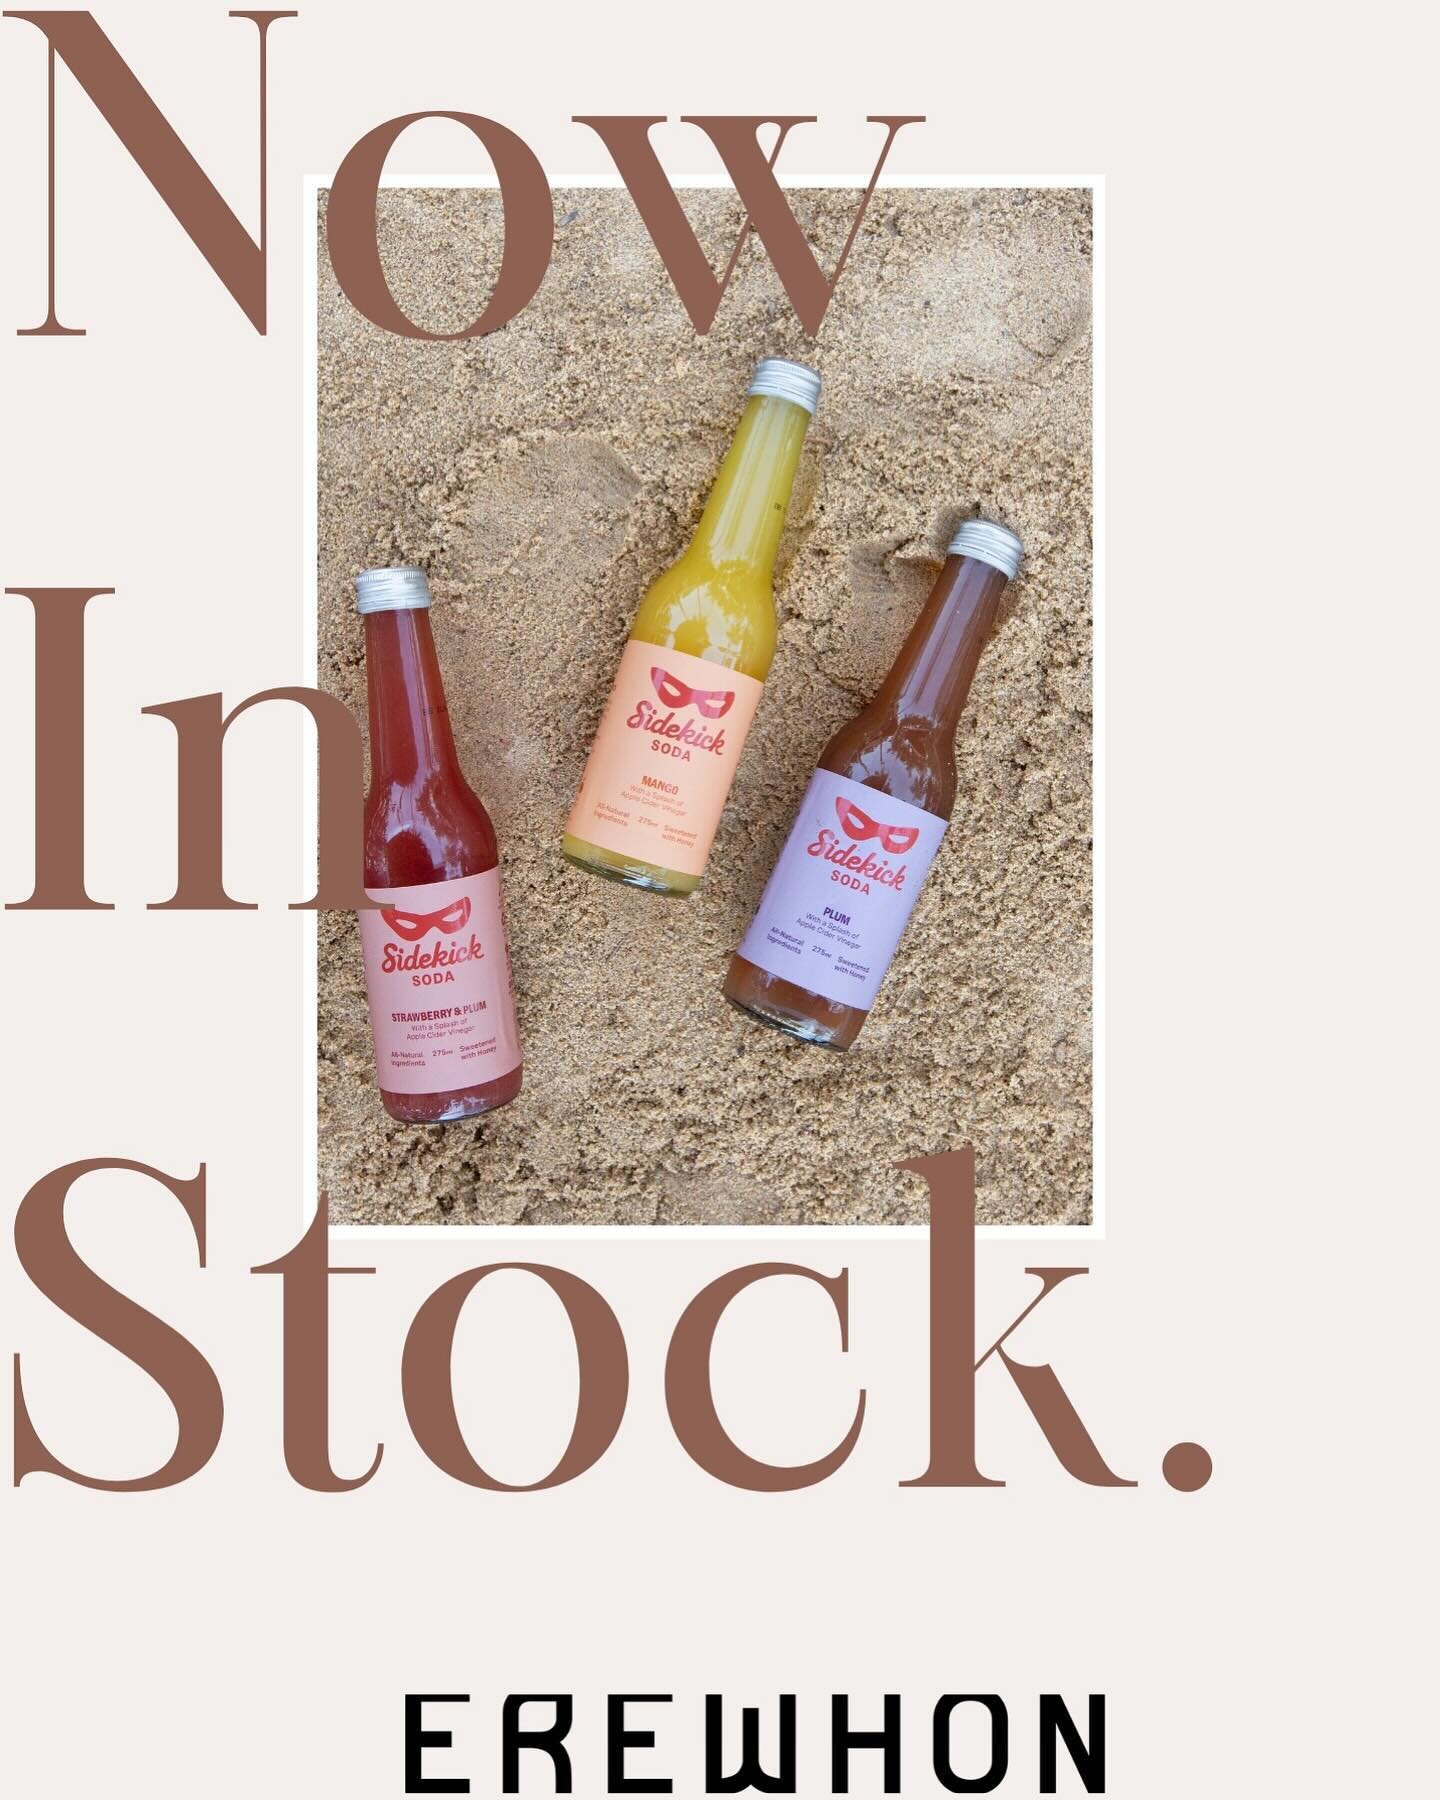 We are SO excited to officially welcome @sidekicksoda into @erewhon! 
Sidekick Soda offers a refreshing alternative to traditional soft drinks and alcoholic beverages, featuring three refreshing flavors - Plum, Strawberry &amp; Plum, and Mango, all c